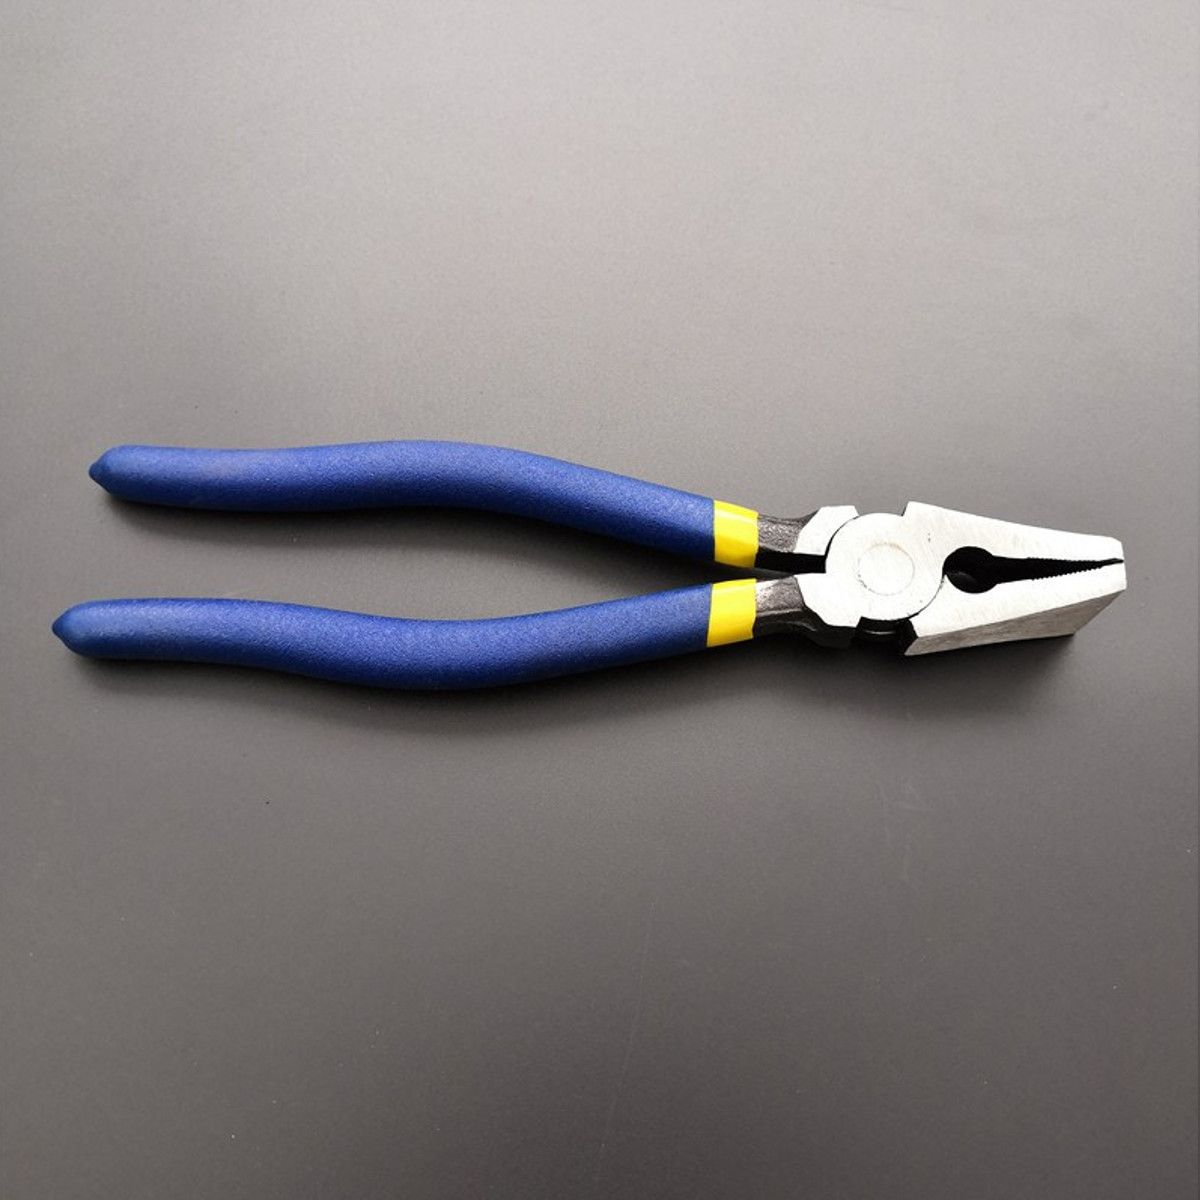 Professional-Stained-Glass-Tool-Kit-Breaking-Grozer-Pliers-Fanout-Curved-Jaw-for-Stained-Glass-Work-1388828